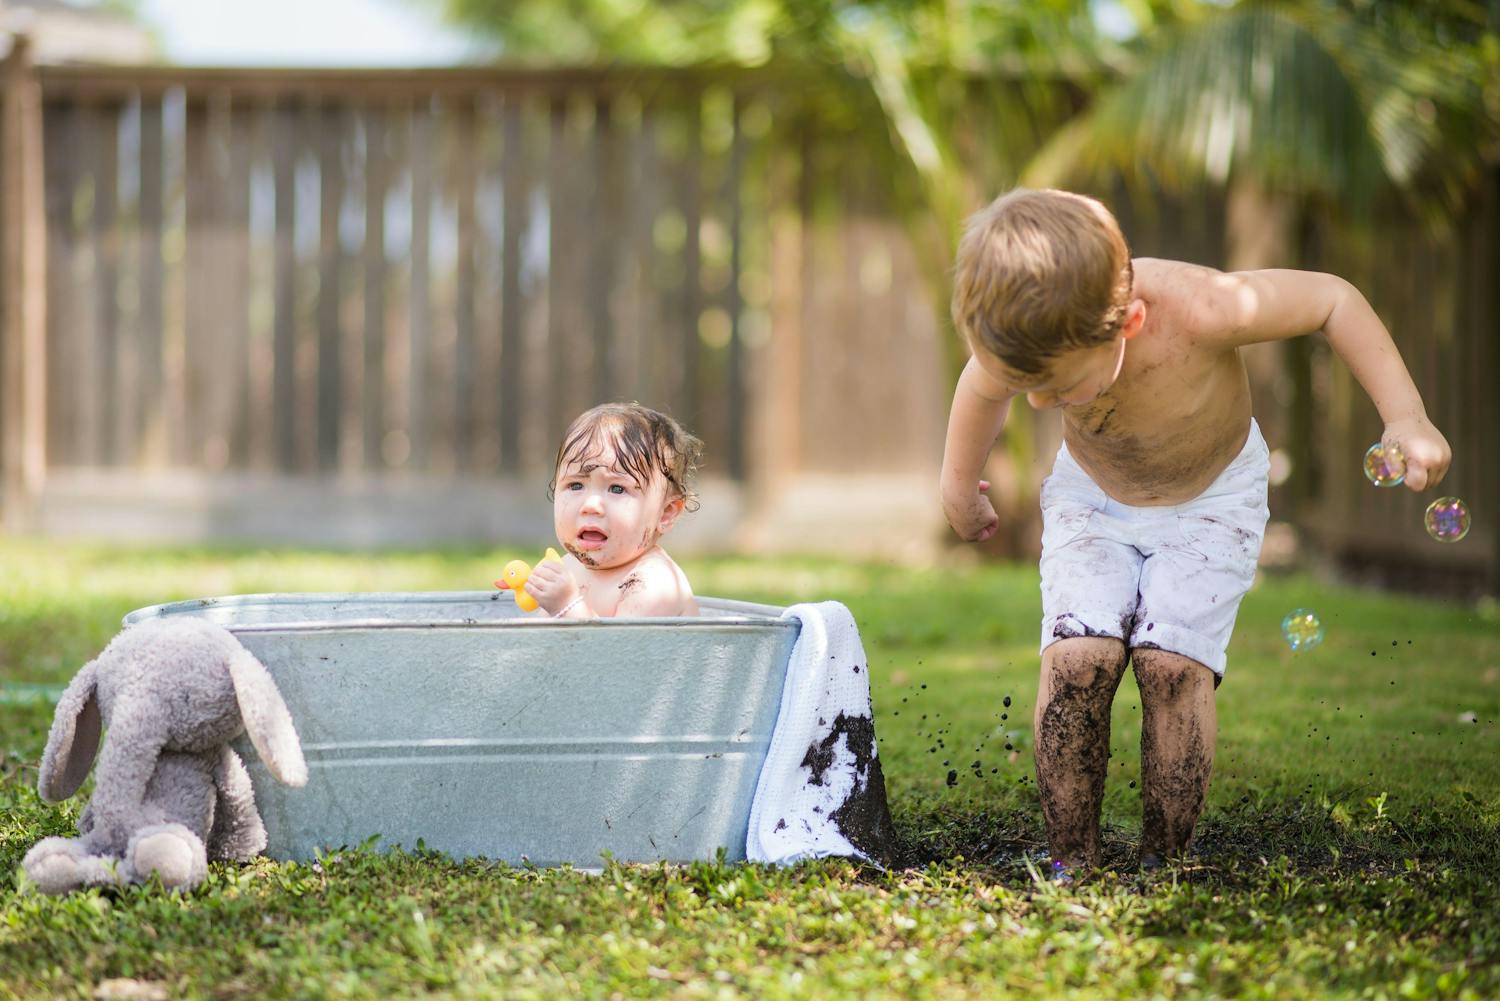 Baby taking a bath in metal tub with brother playing in the mud next to him